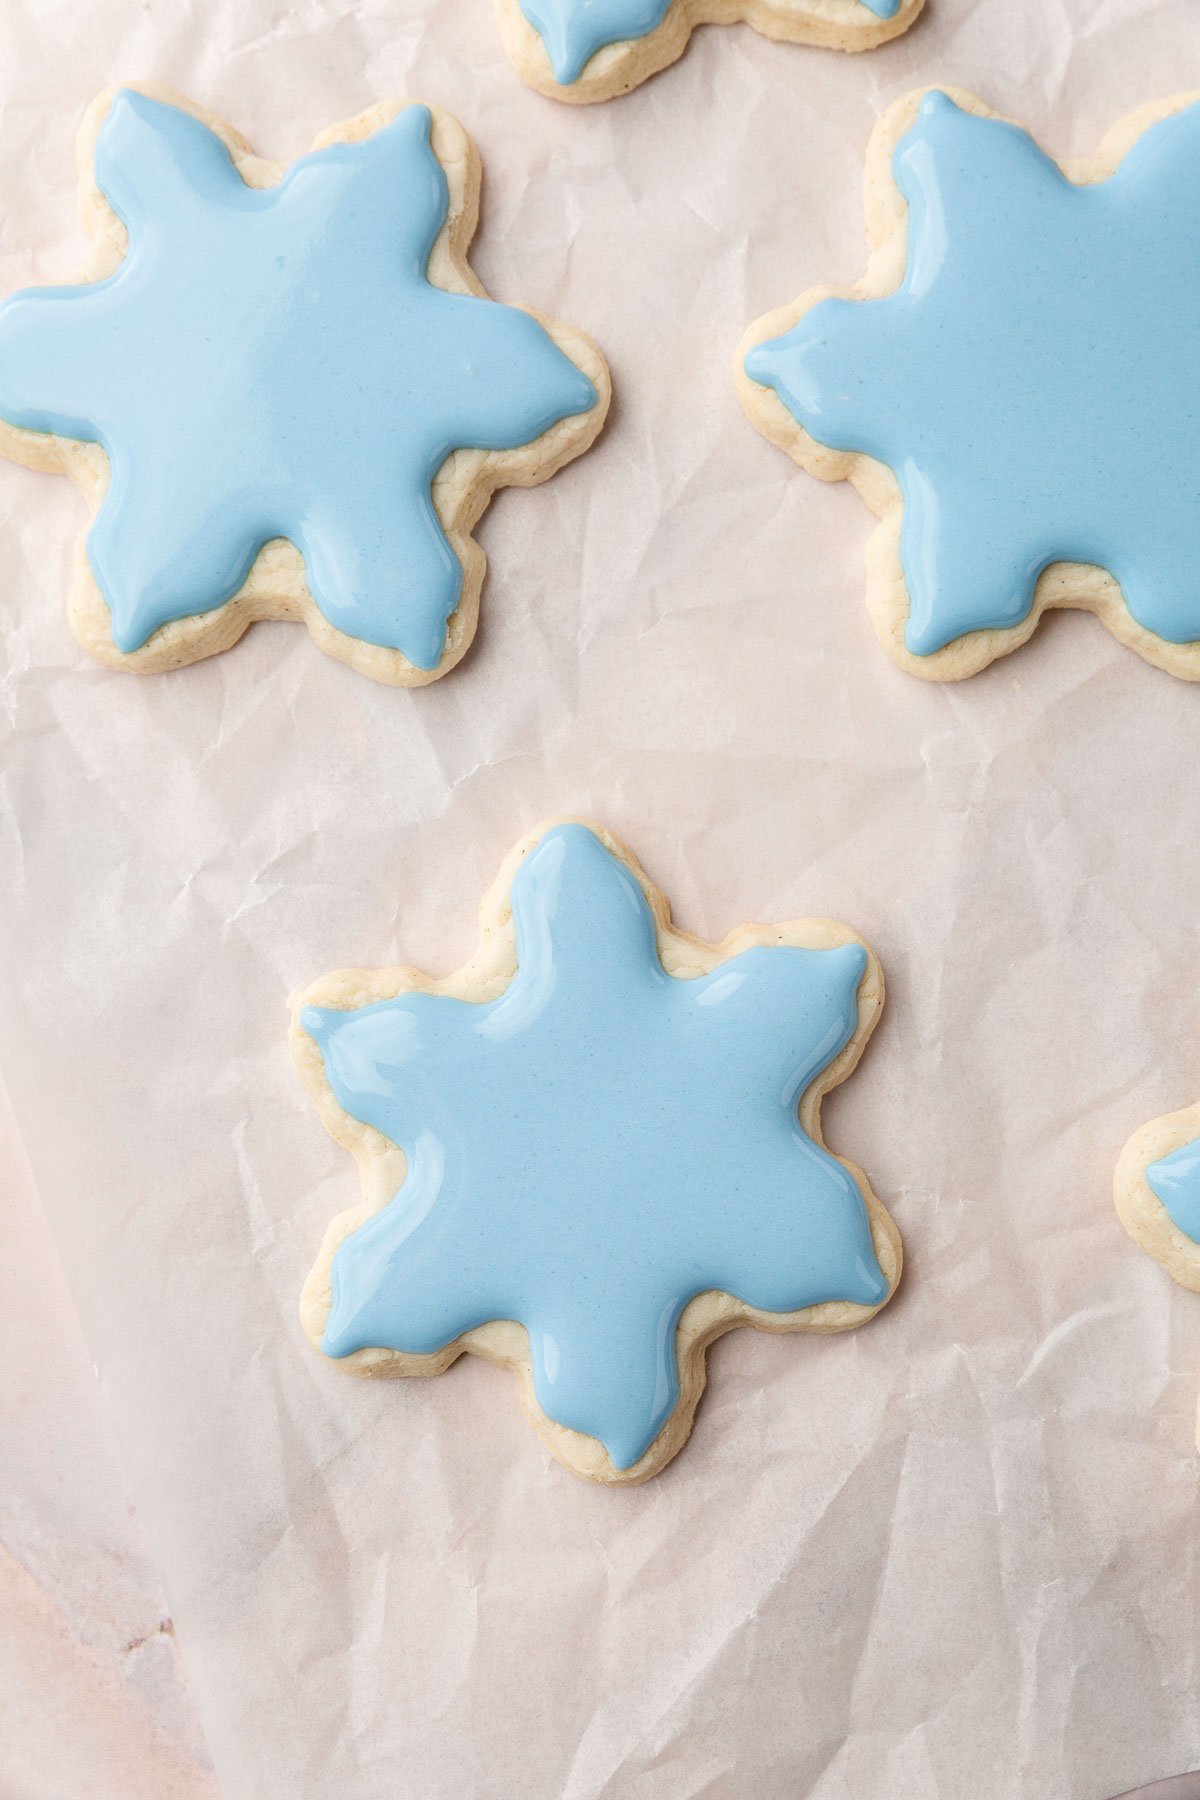 Three gluten-free snowflake cookies frosted with blue royal icing on a piece of parchment paper.